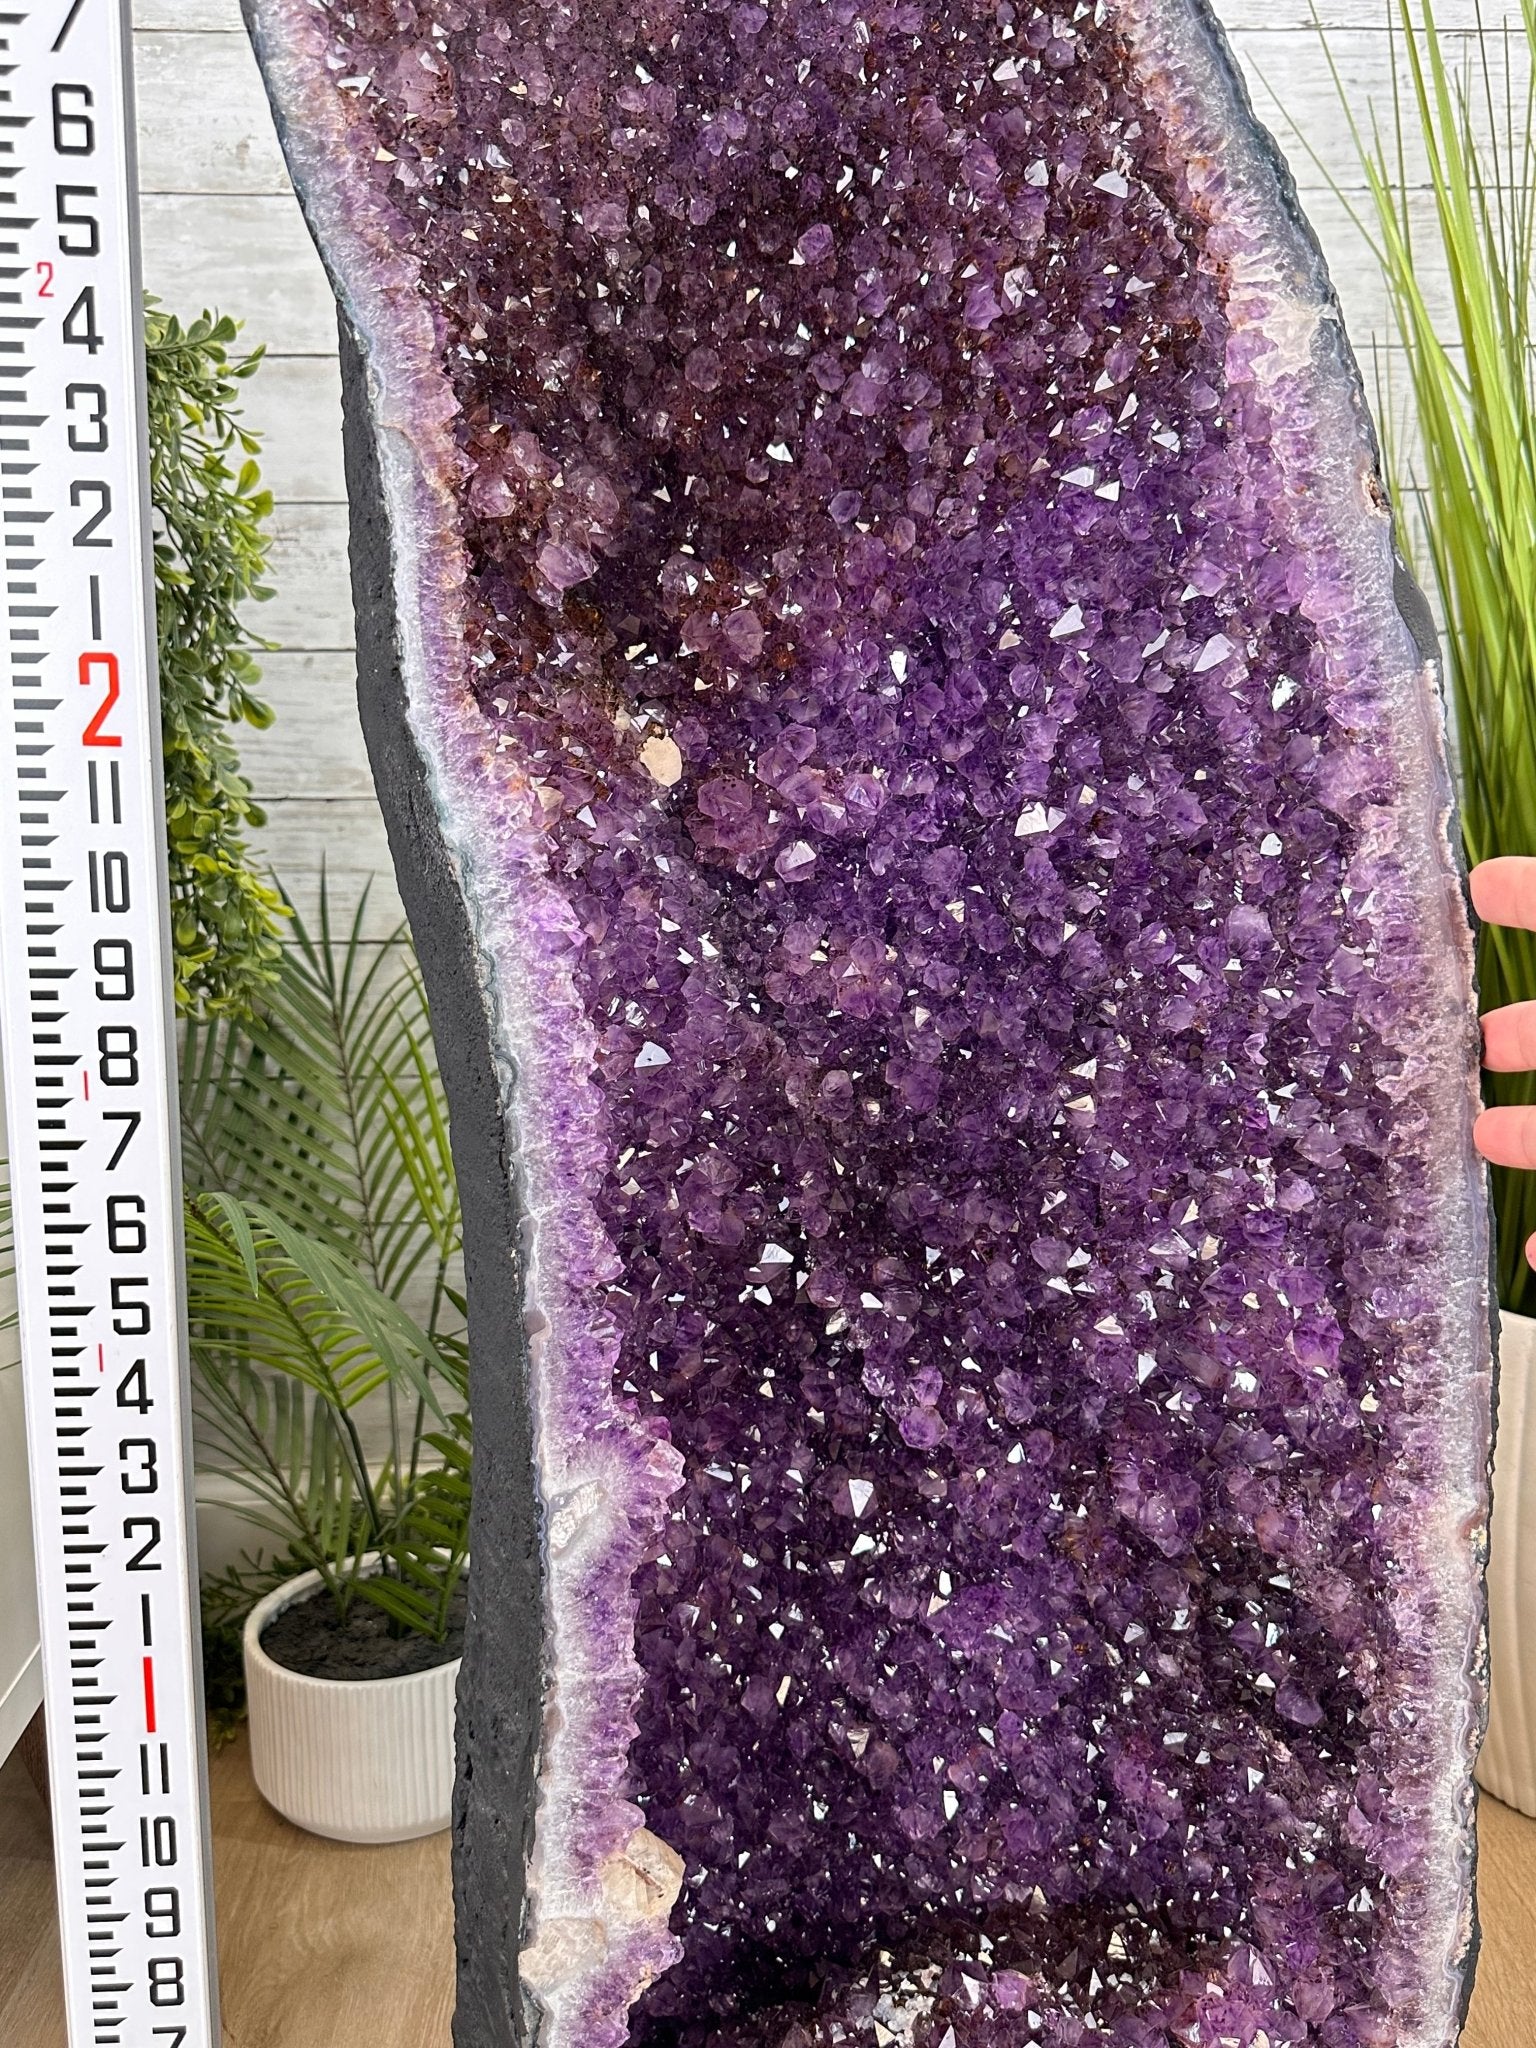 Extra Plus Quality Brazilian Amethyst Cathedral, 154.4 lbs & 38" Tall, Model #5601-1242 by Brazil Gems - Brazil GemsBrazil GemsExtra Plus Quality Brazilian Amethyst Cathedral, 154.4 lbs & 38" Tall, Model #5601-1242 by Brazil GemsCathedrals5601-1242